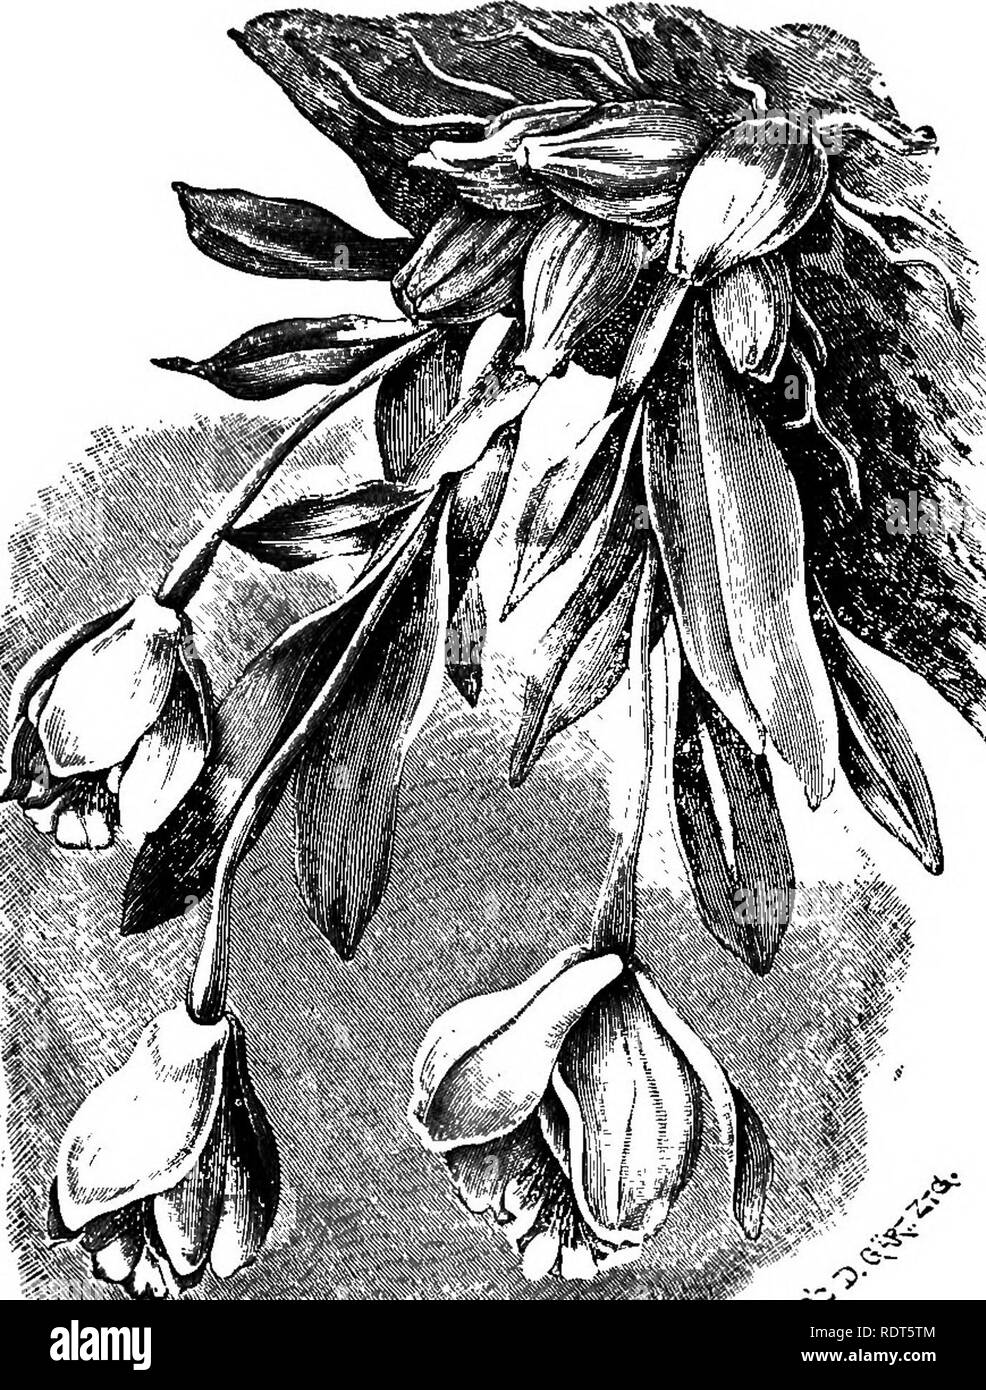 . The orchid-grower's manual, containing descriptions of the best species and varieties of orchidaceous plants in cultivation ... Orchids. CATTLEYA. 157 It Succeeds best in the Mexican house, as near the glass as its native country, possible.— Mexico. Fia.—Bot. Mag., t. 3742 ; Pcseatorea, t. 9 ; Flore des Scnvs, t. 1689 ; Warner, Sri. Oi-oli. PI., iii. t. 18 ; Hooli. Ut Cent., t. 34 ; Rnchenhachia.. i. t. 20 ; Jonrii. of Hort xv 1887, p. 565, f. 66; VciMi's Man. Orcli. PL, ii. p. 33 ; Orclild Albvw, x. t. 469. C. CITRINO-IN- TERMEDIA, Rolfe.— We consider this a wonderful hybrid. It was raised  Stock Photo